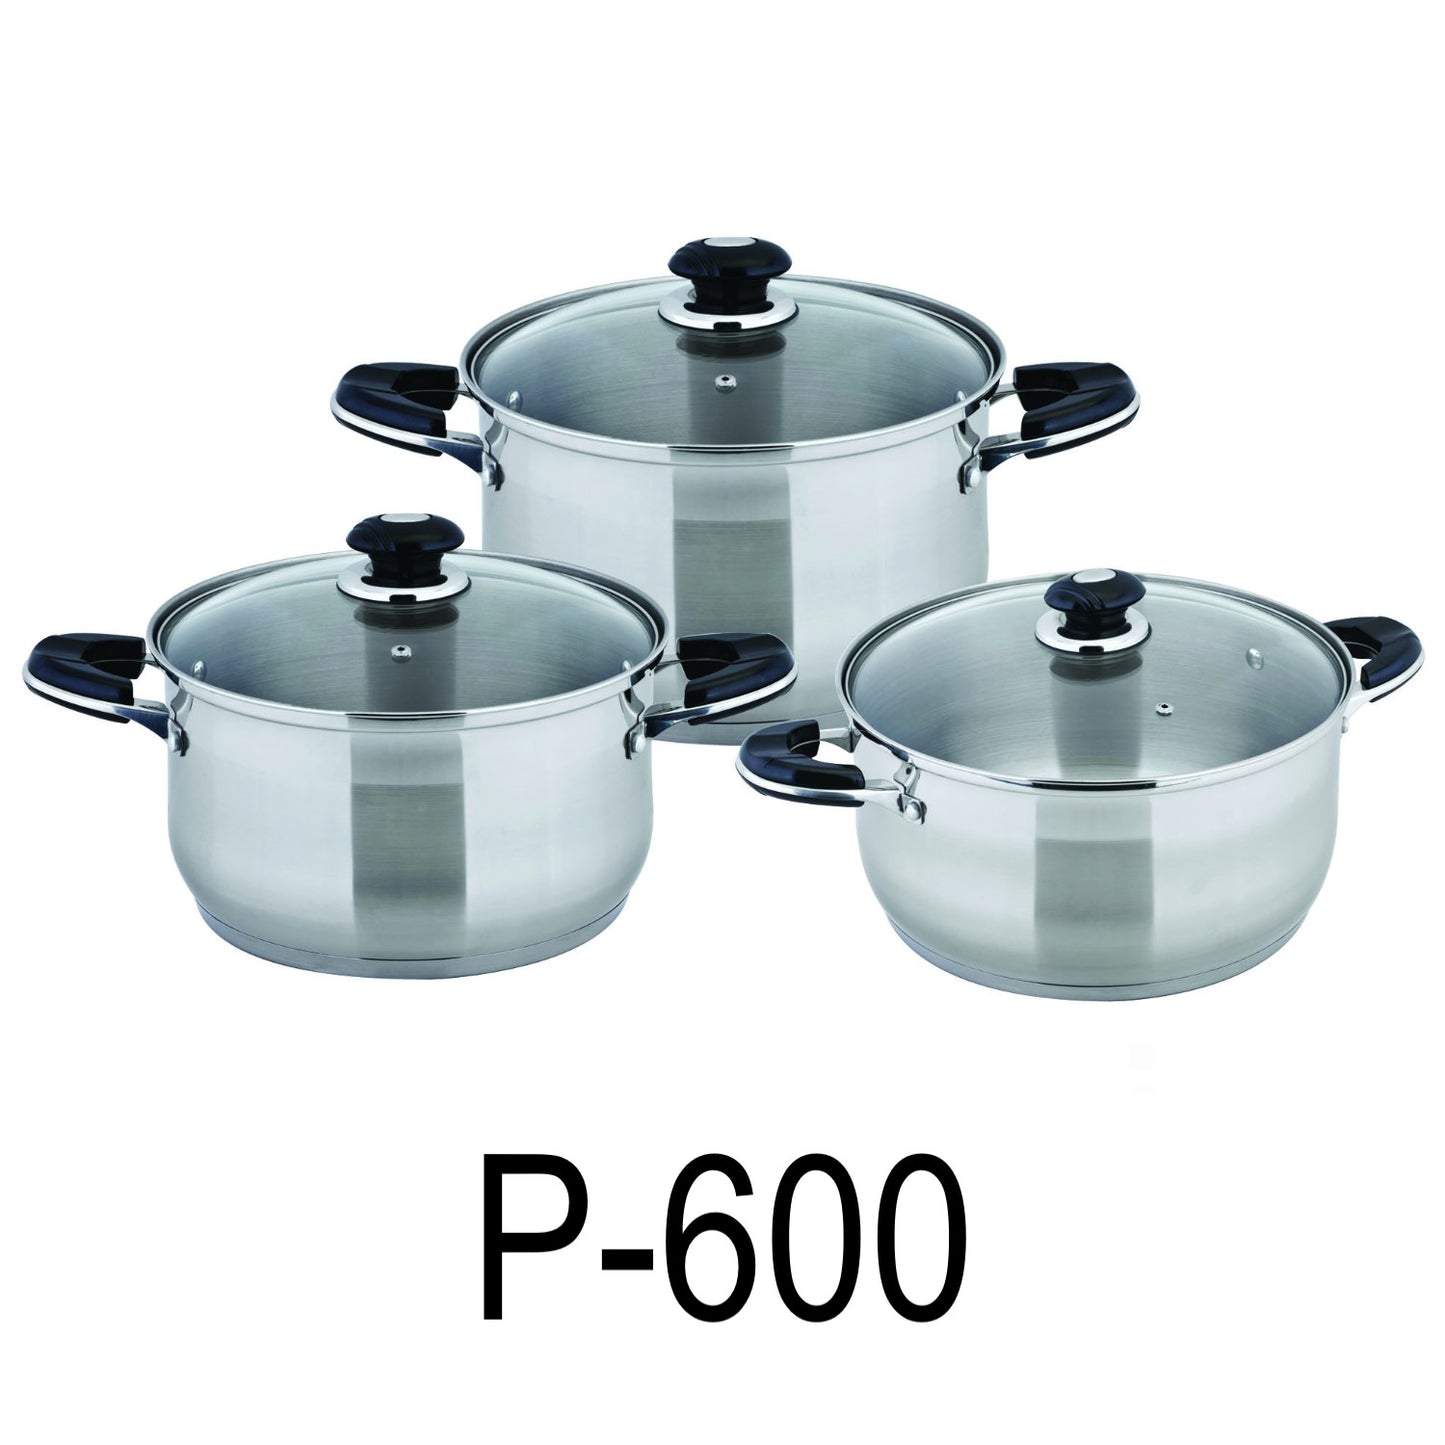 6 PC Stainless Steel 18/10 Induction Shallow Pot